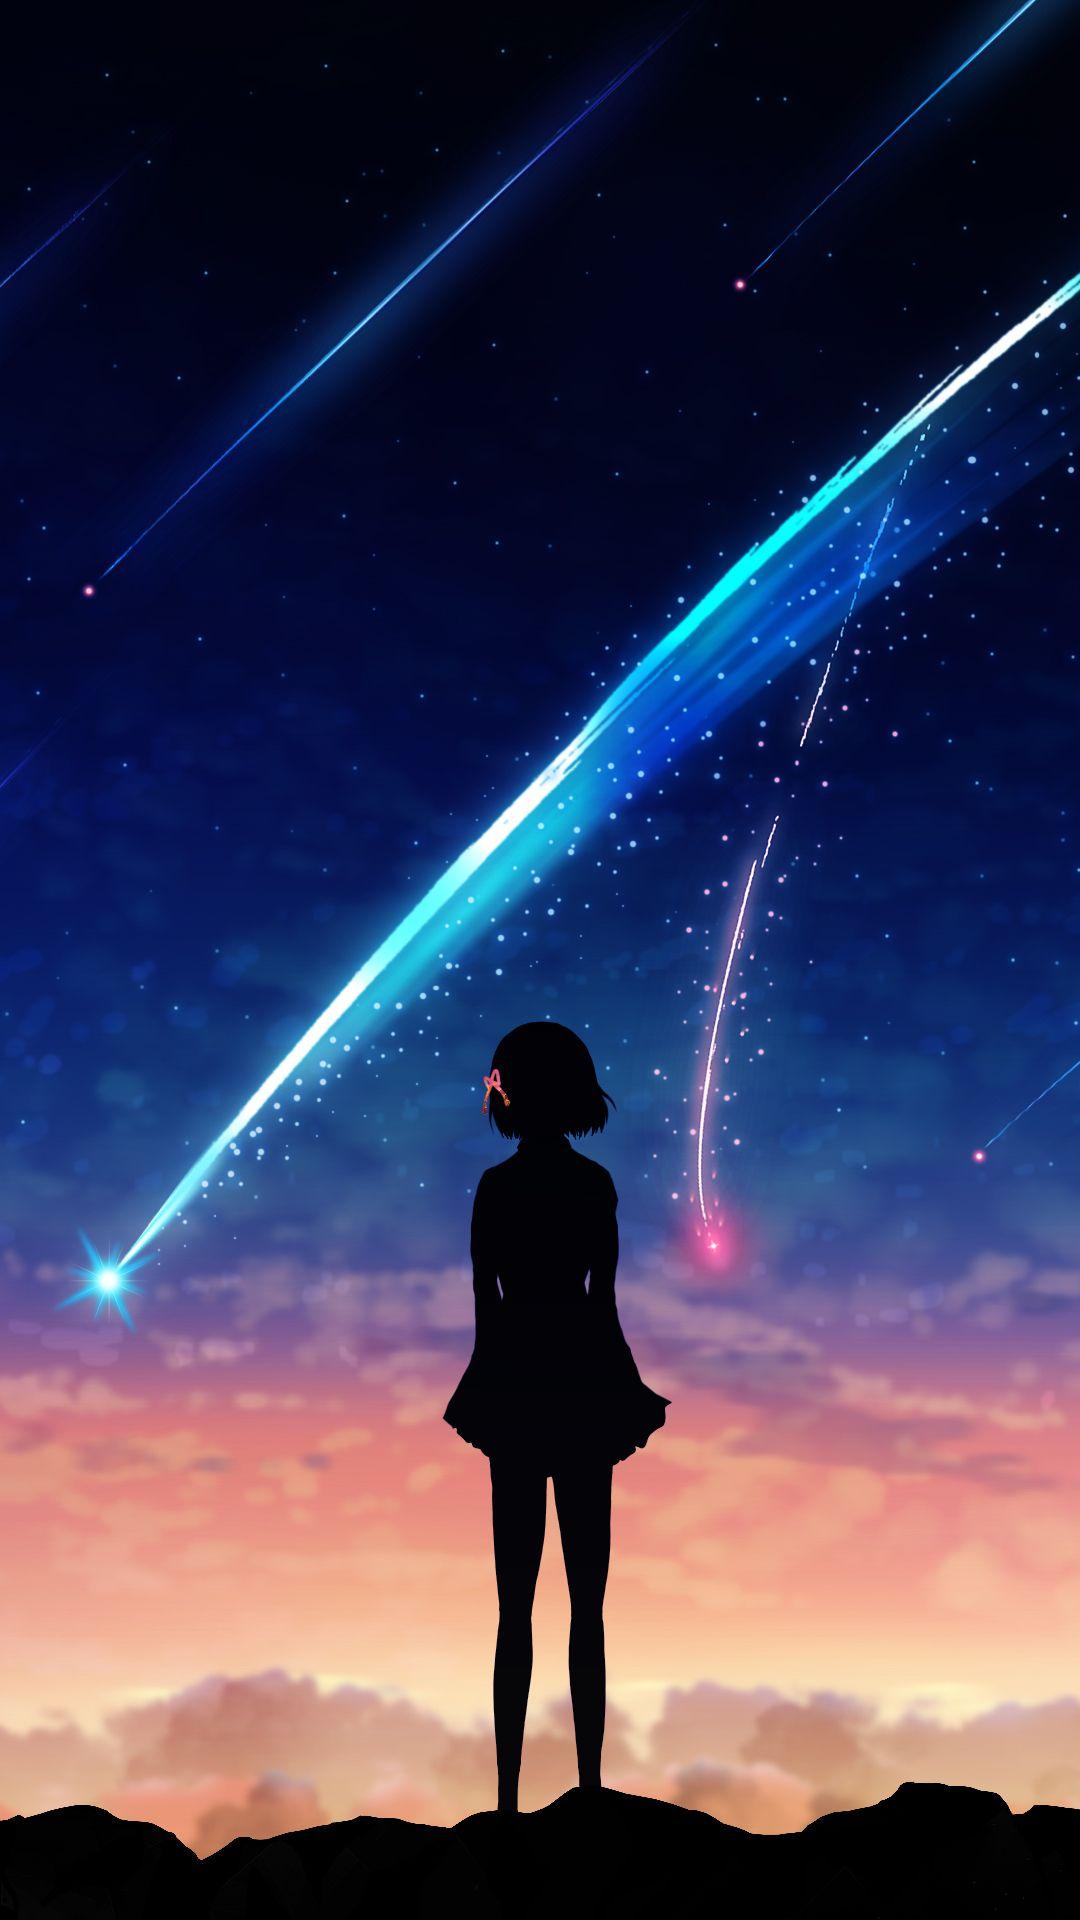 Download This Wallpaper Anime Your Name. (1080x1920) For All Your Phones And Tablets. Anime Wallpaper Phone, Anime Galaxy, Anime Background Wallpaper